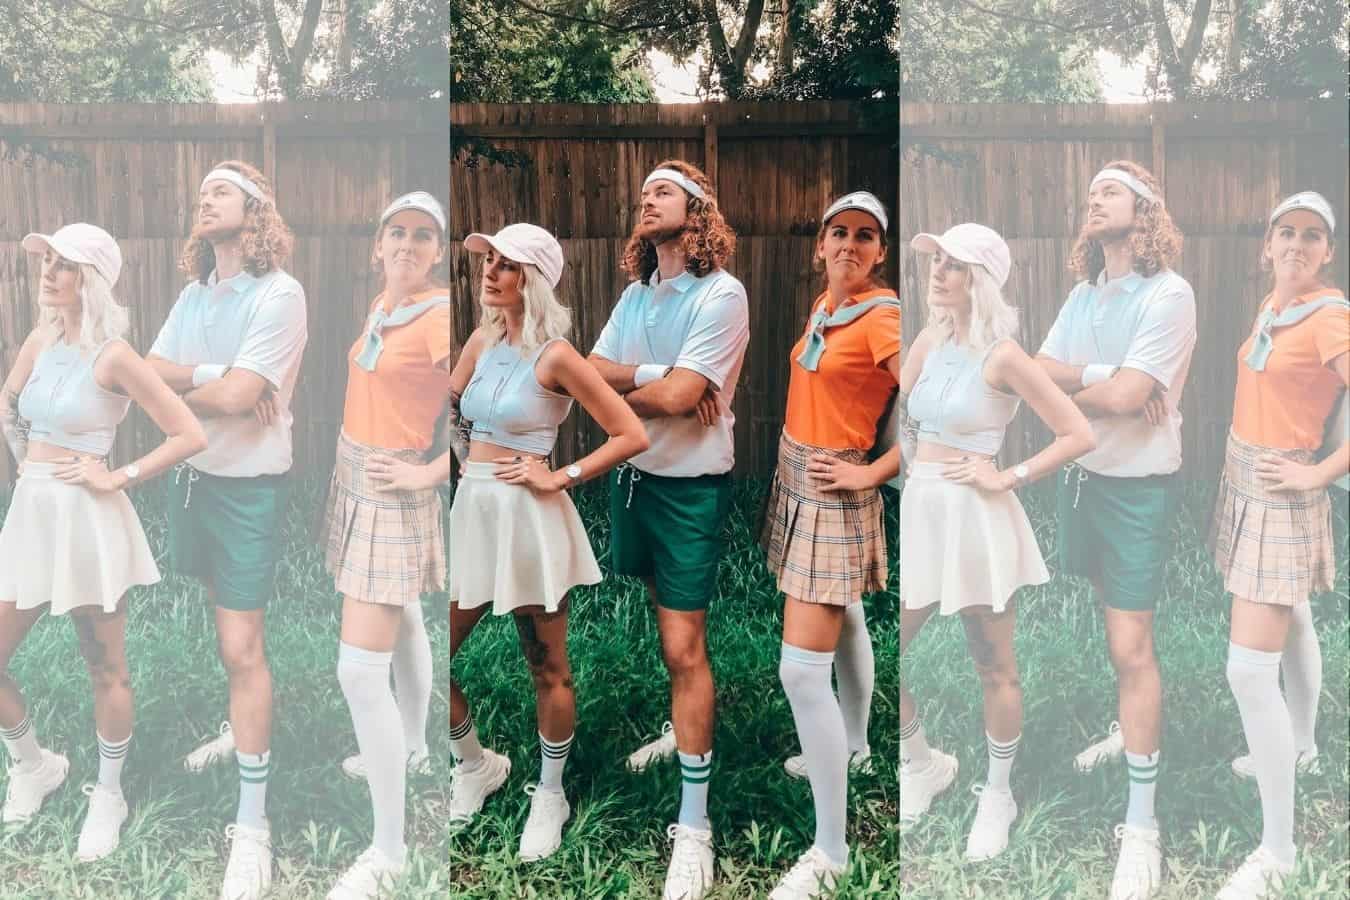 Golf Pros And Tennis Hoes: How To Throw An Epic Themed Party